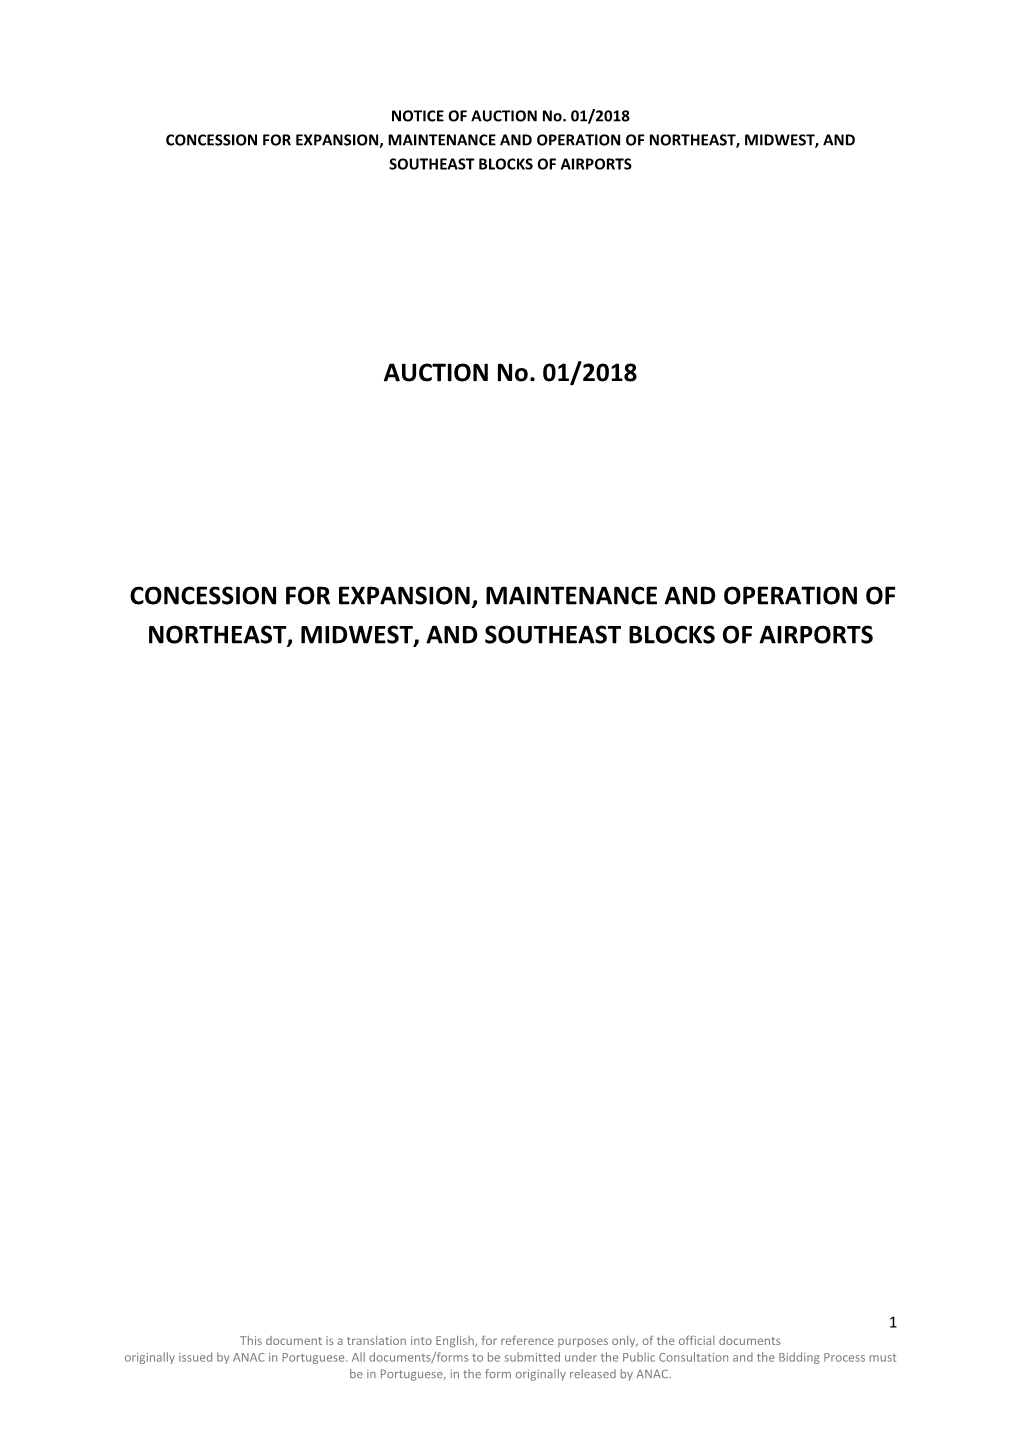 AUCTION No. 01/2018 CONCESSION for EXPANSION, MAINTENANCE and OPERATION of NORTHEAST, MIDWEST, and SOUTHEAST BLOCKS of AIRPORTS